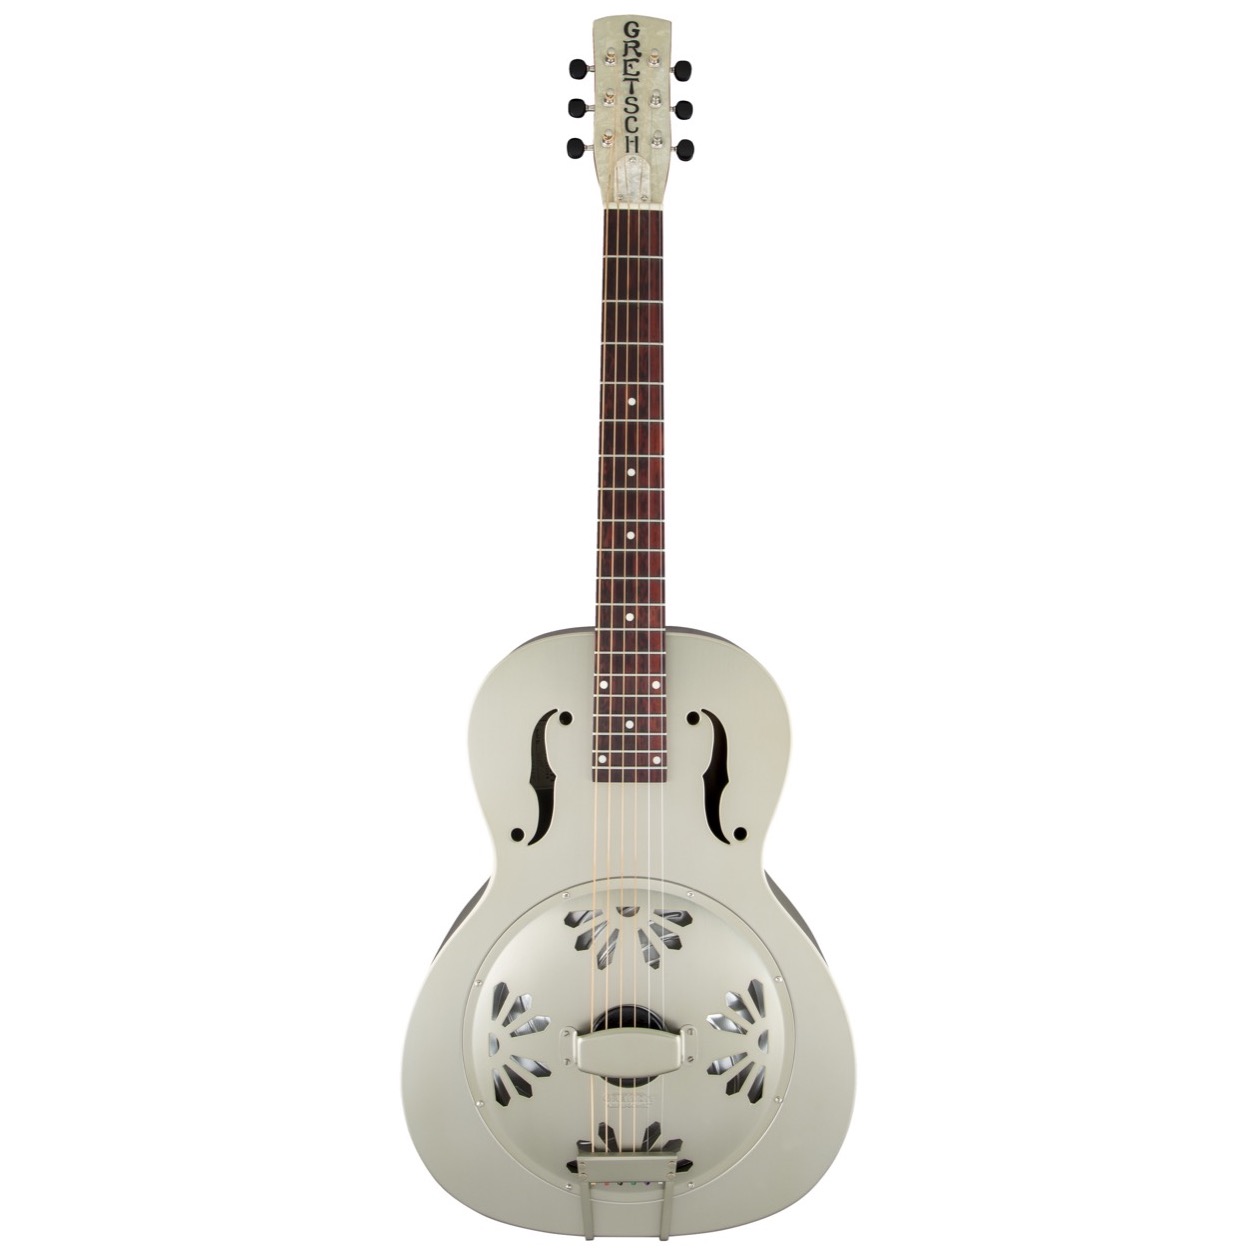 Gretsch G 9201 / G9201 Honey Dipper Round-Neck, Brass Body Biscuit Cone Resonator Guitar, Shed Roof Finish